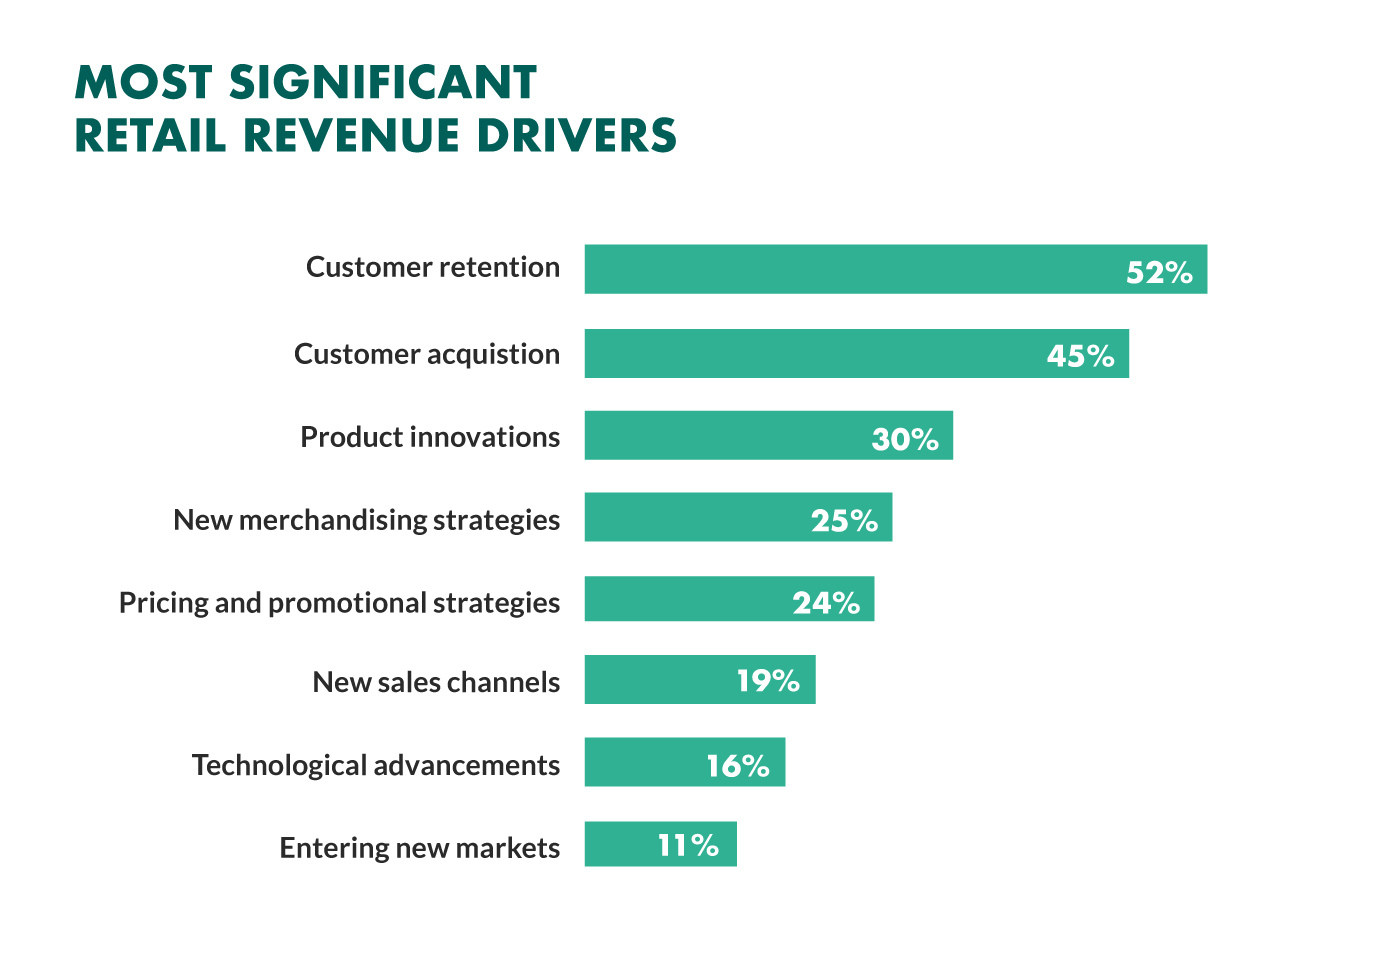 Graph showing customer retention as most important revenue driver